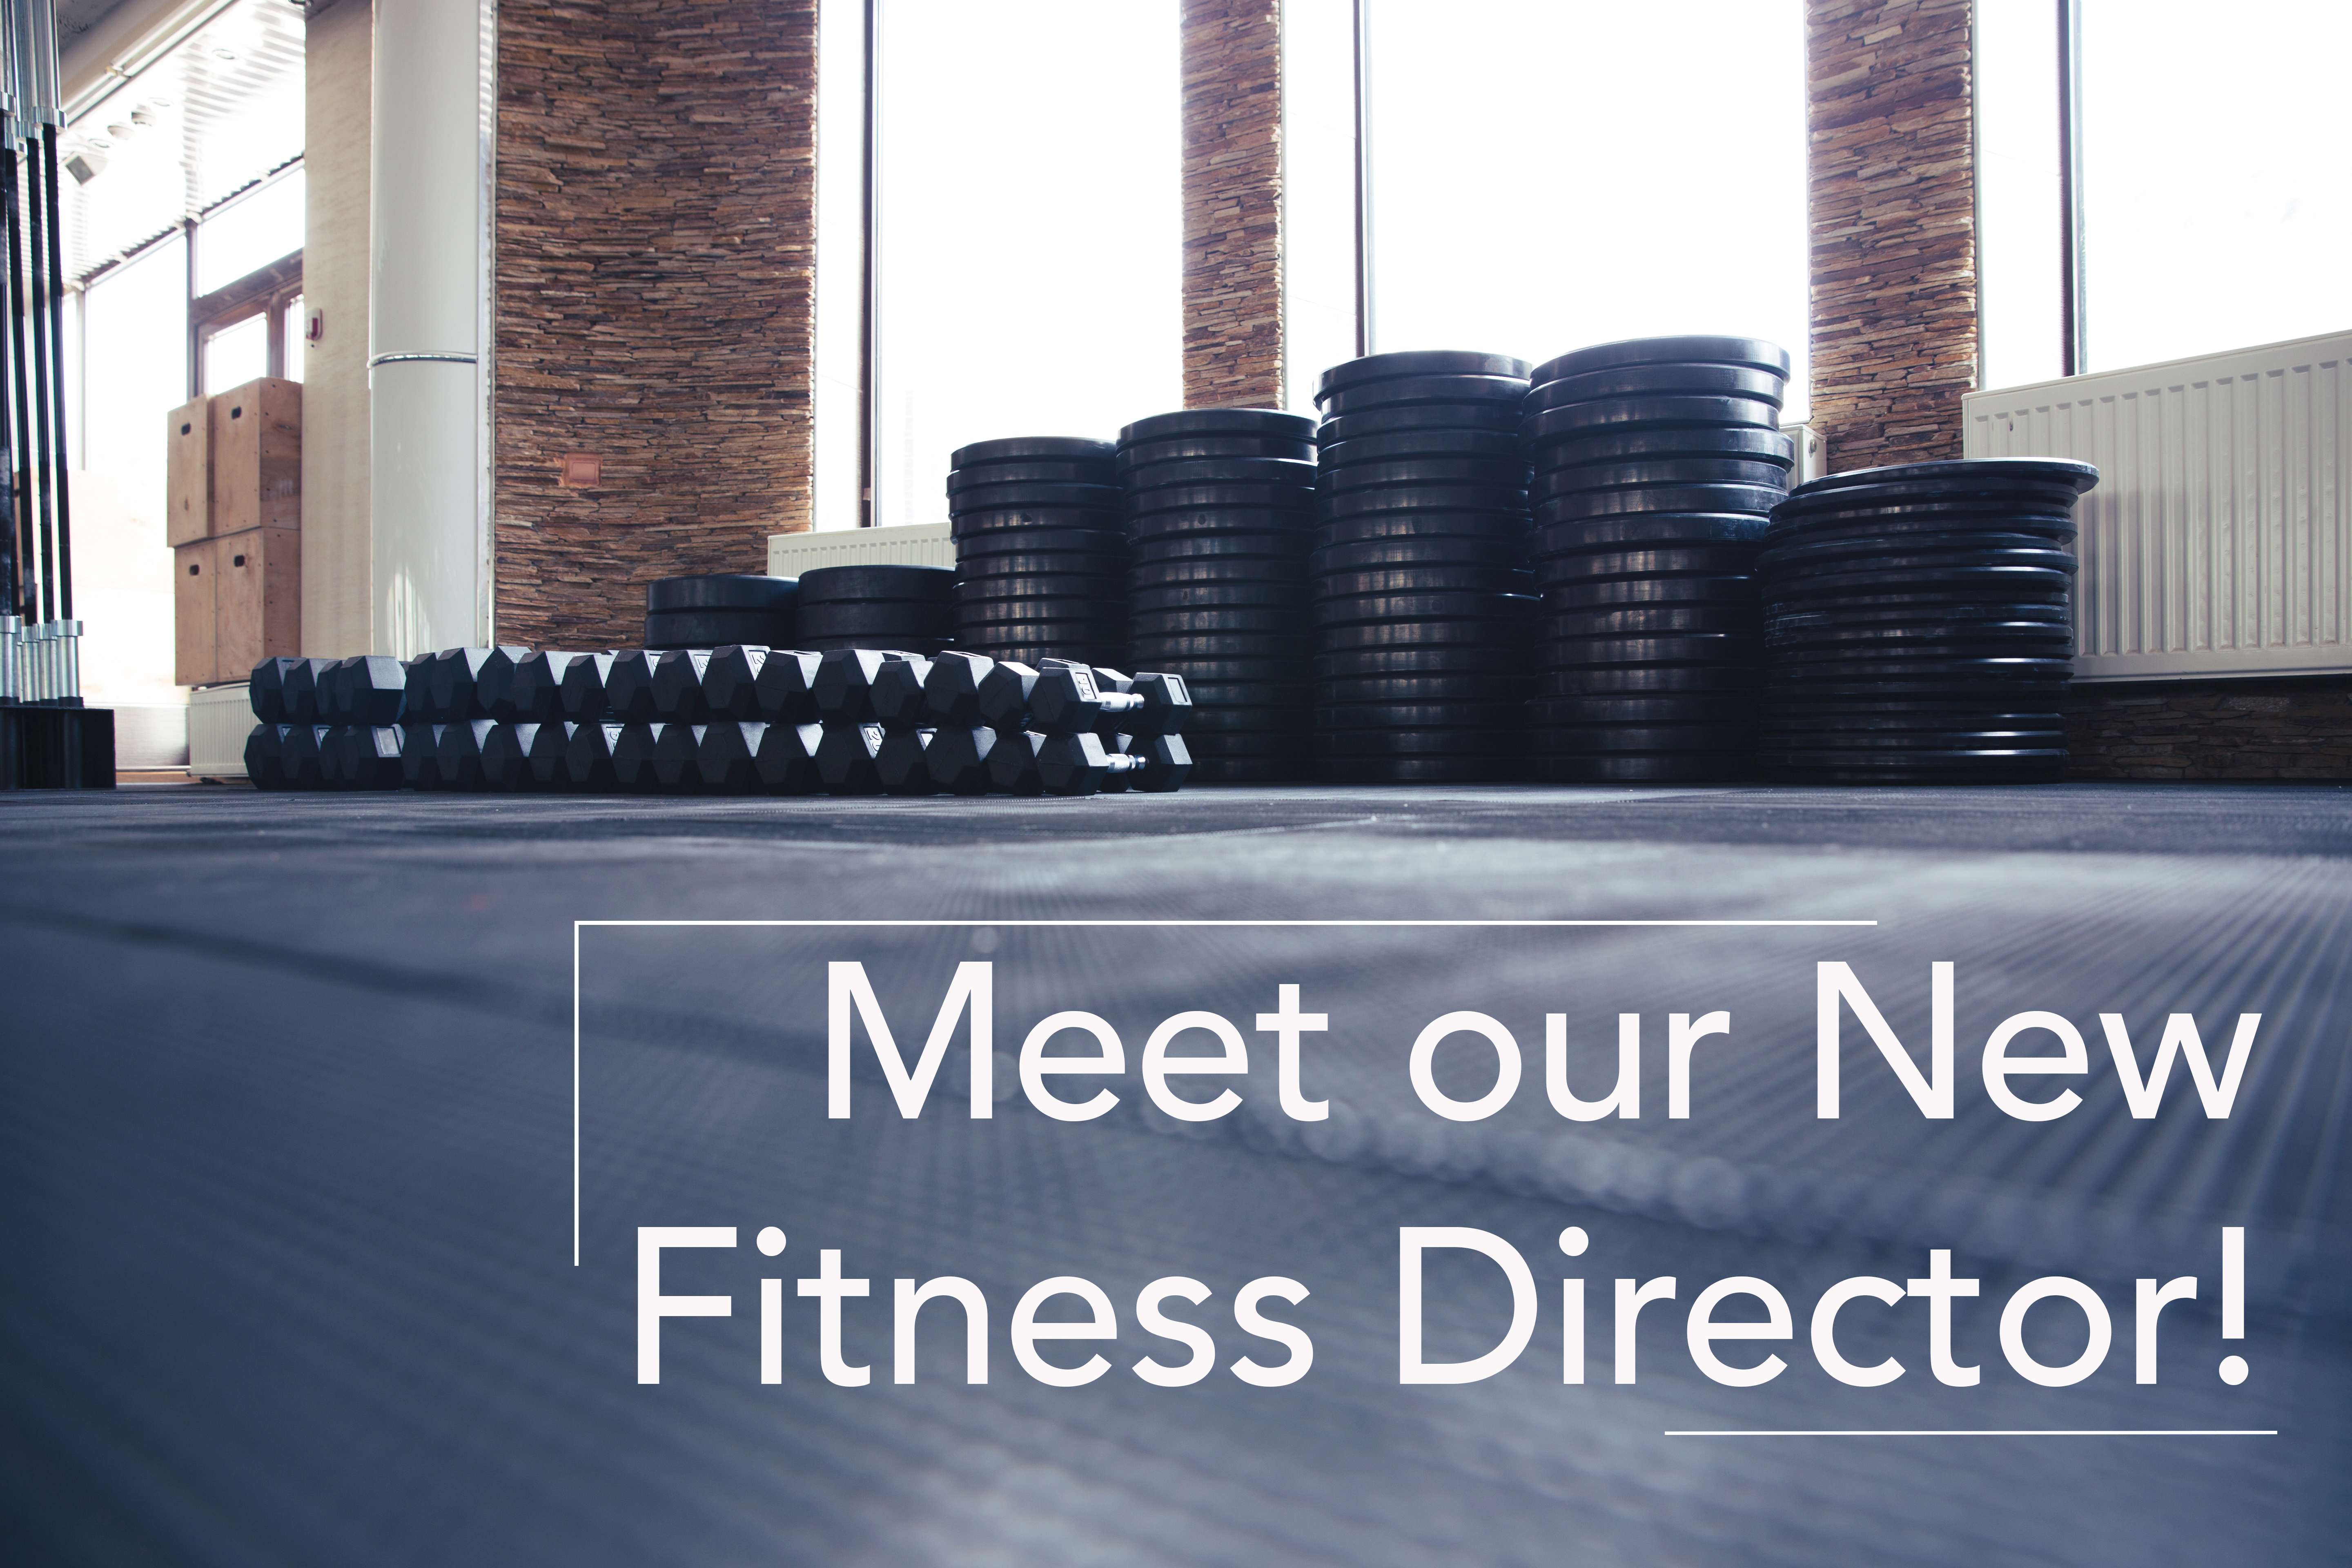 Meet our New Fitness Director!